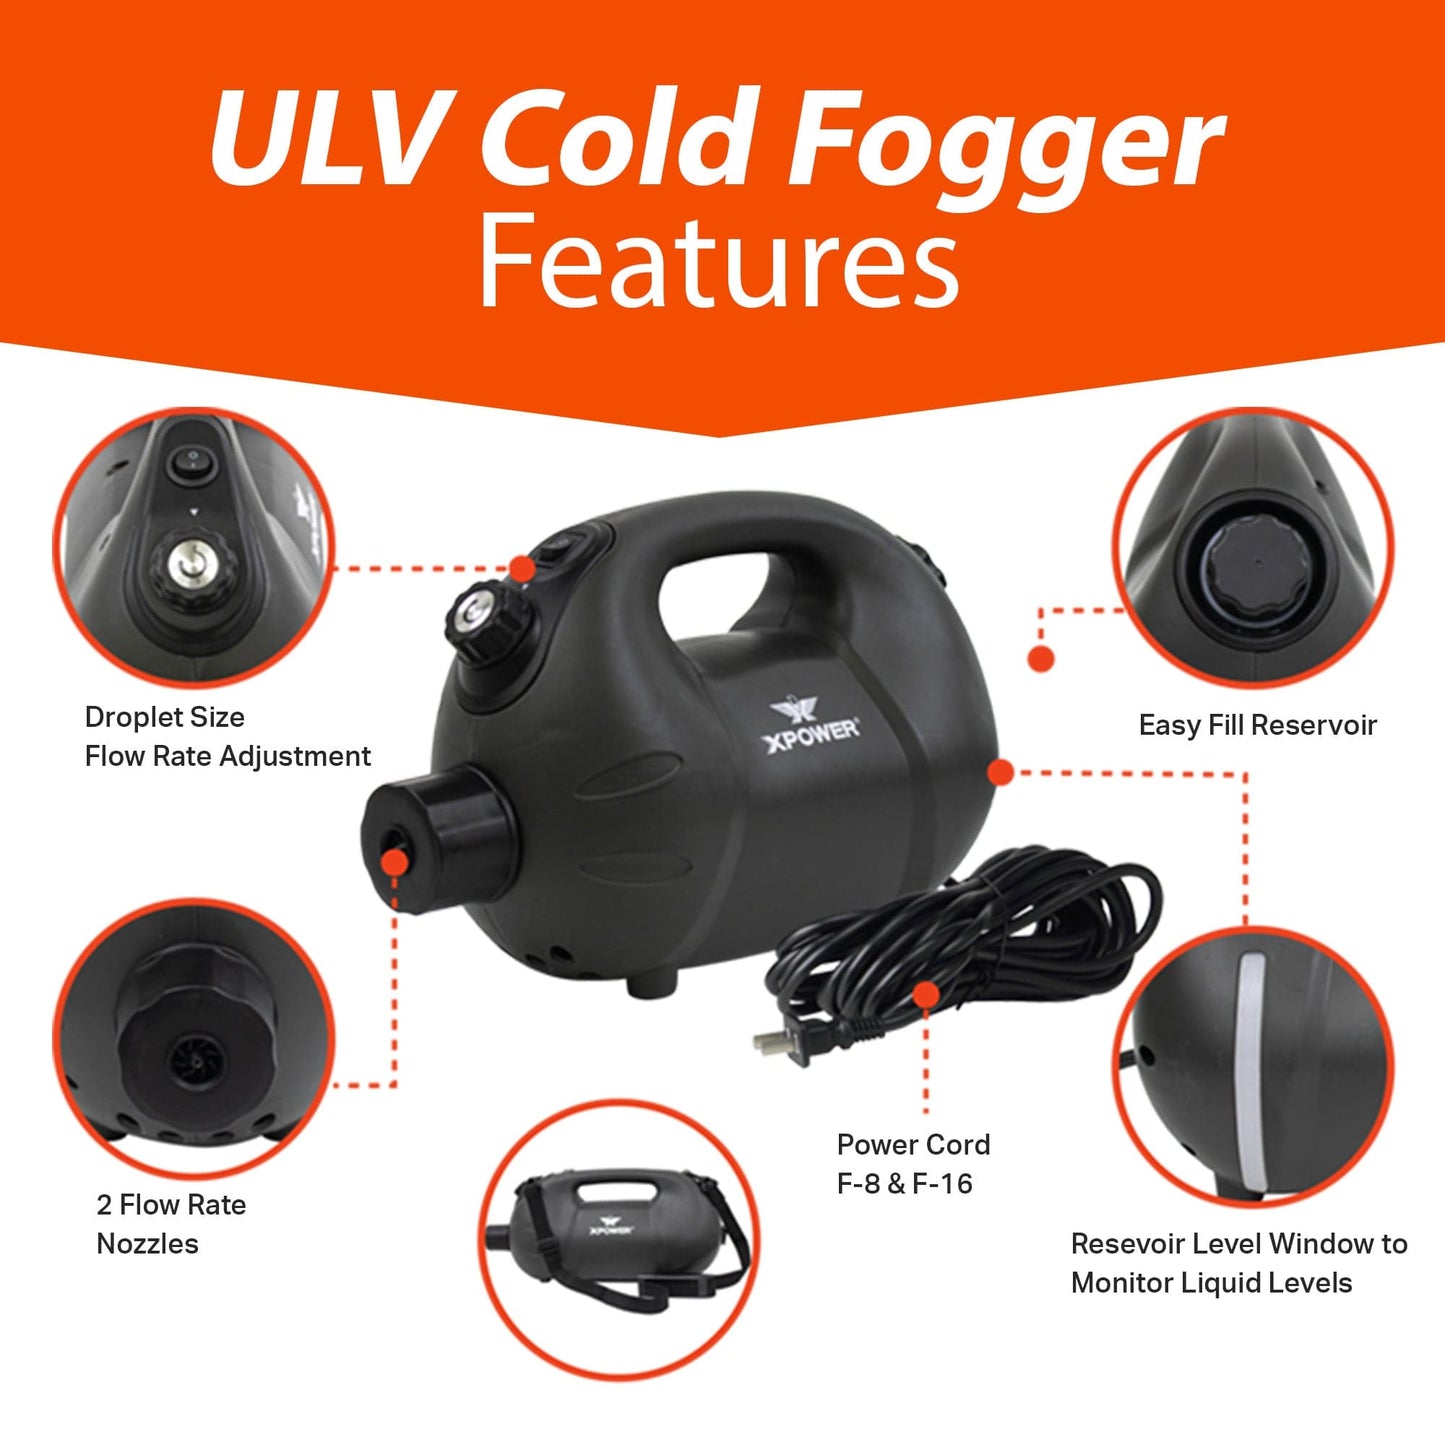 XPOWER F-16B ULV Cold Fogger Battery Powered Rechargeable Cordless Fogging Machine Sprayer